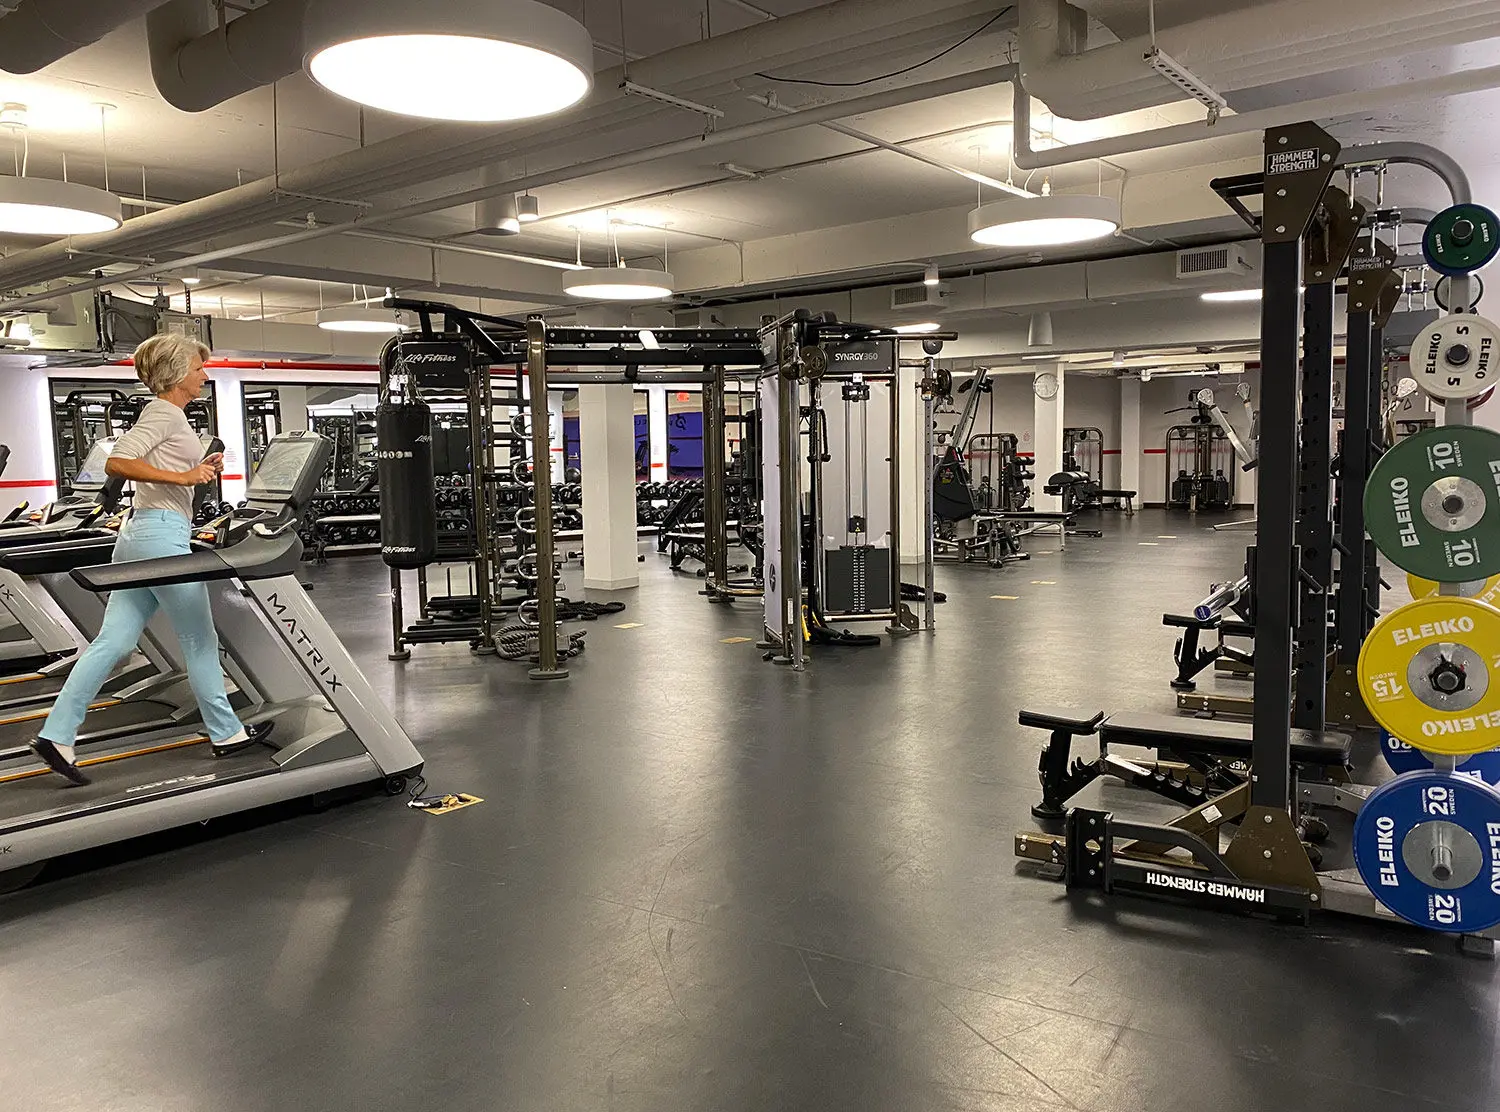 TWA Hotel The gym is an attraction on its own. In fact, guests that are not booking a room for overnight can still get access and use it. It's massive and incredibly well equipped